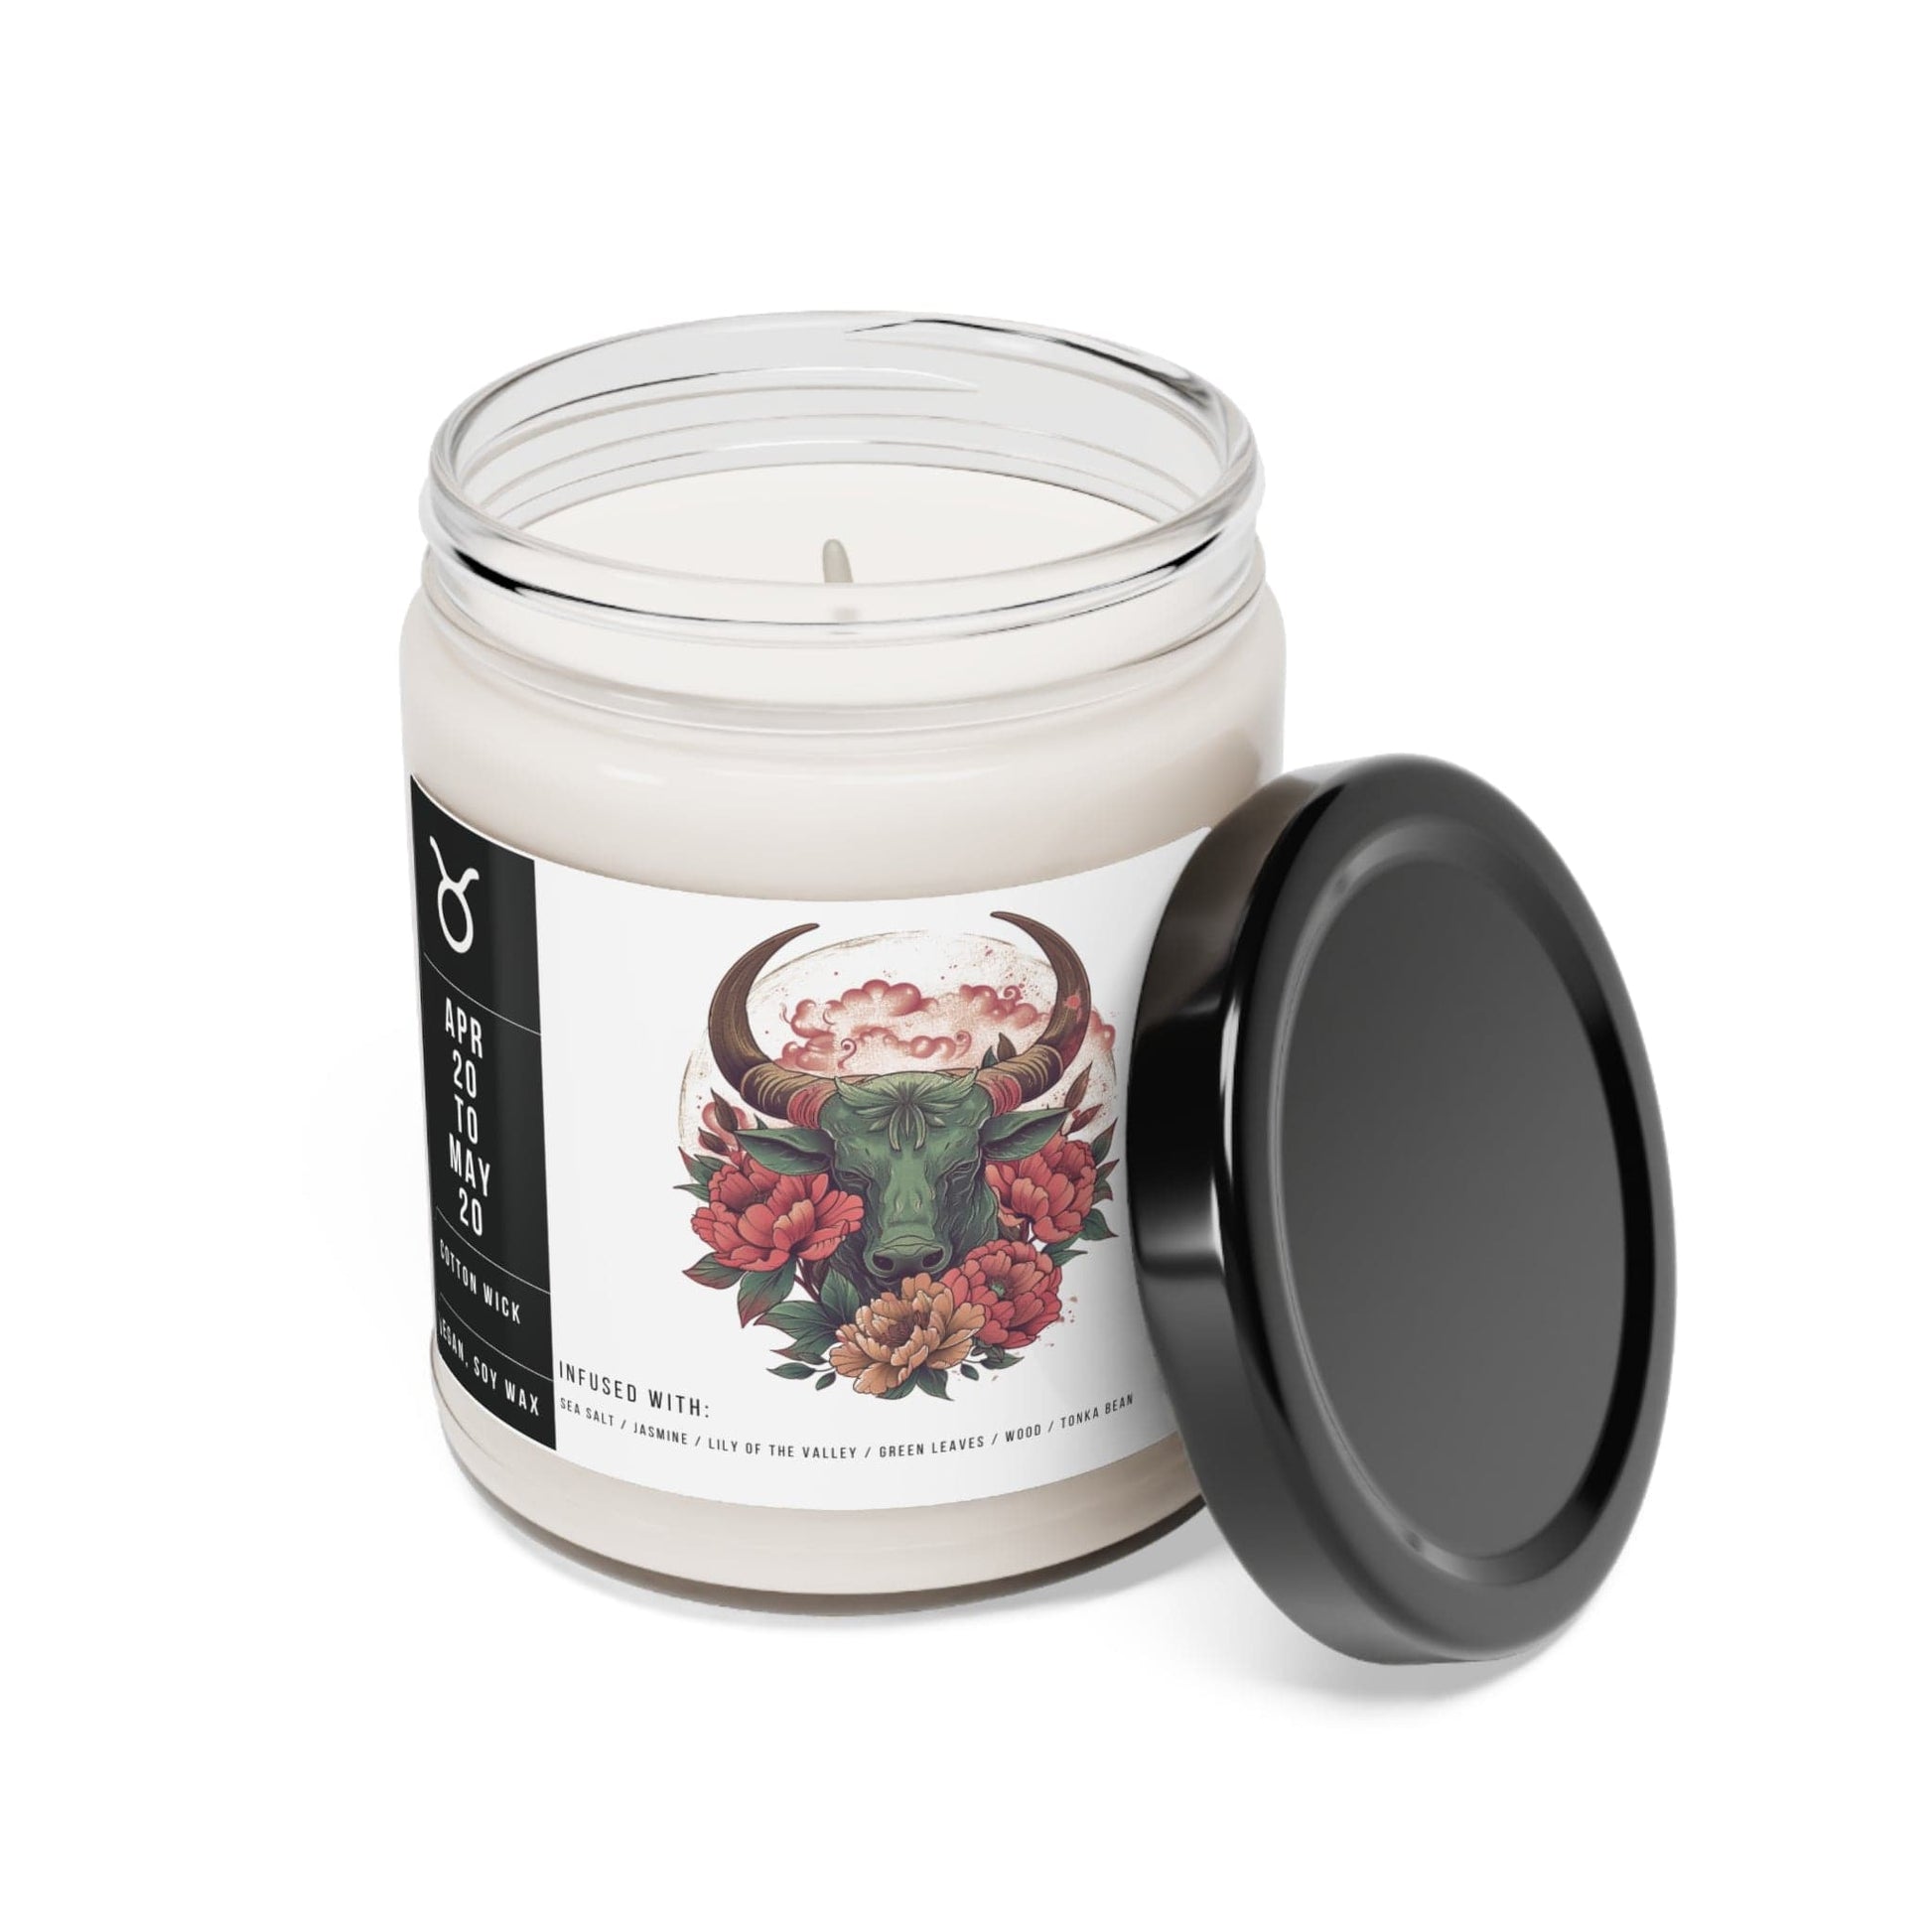 Home Decor Sea Salt + Orchid / 9oz Taurus Zodiac Scented Soy Candle Collection – Essence of the Earth